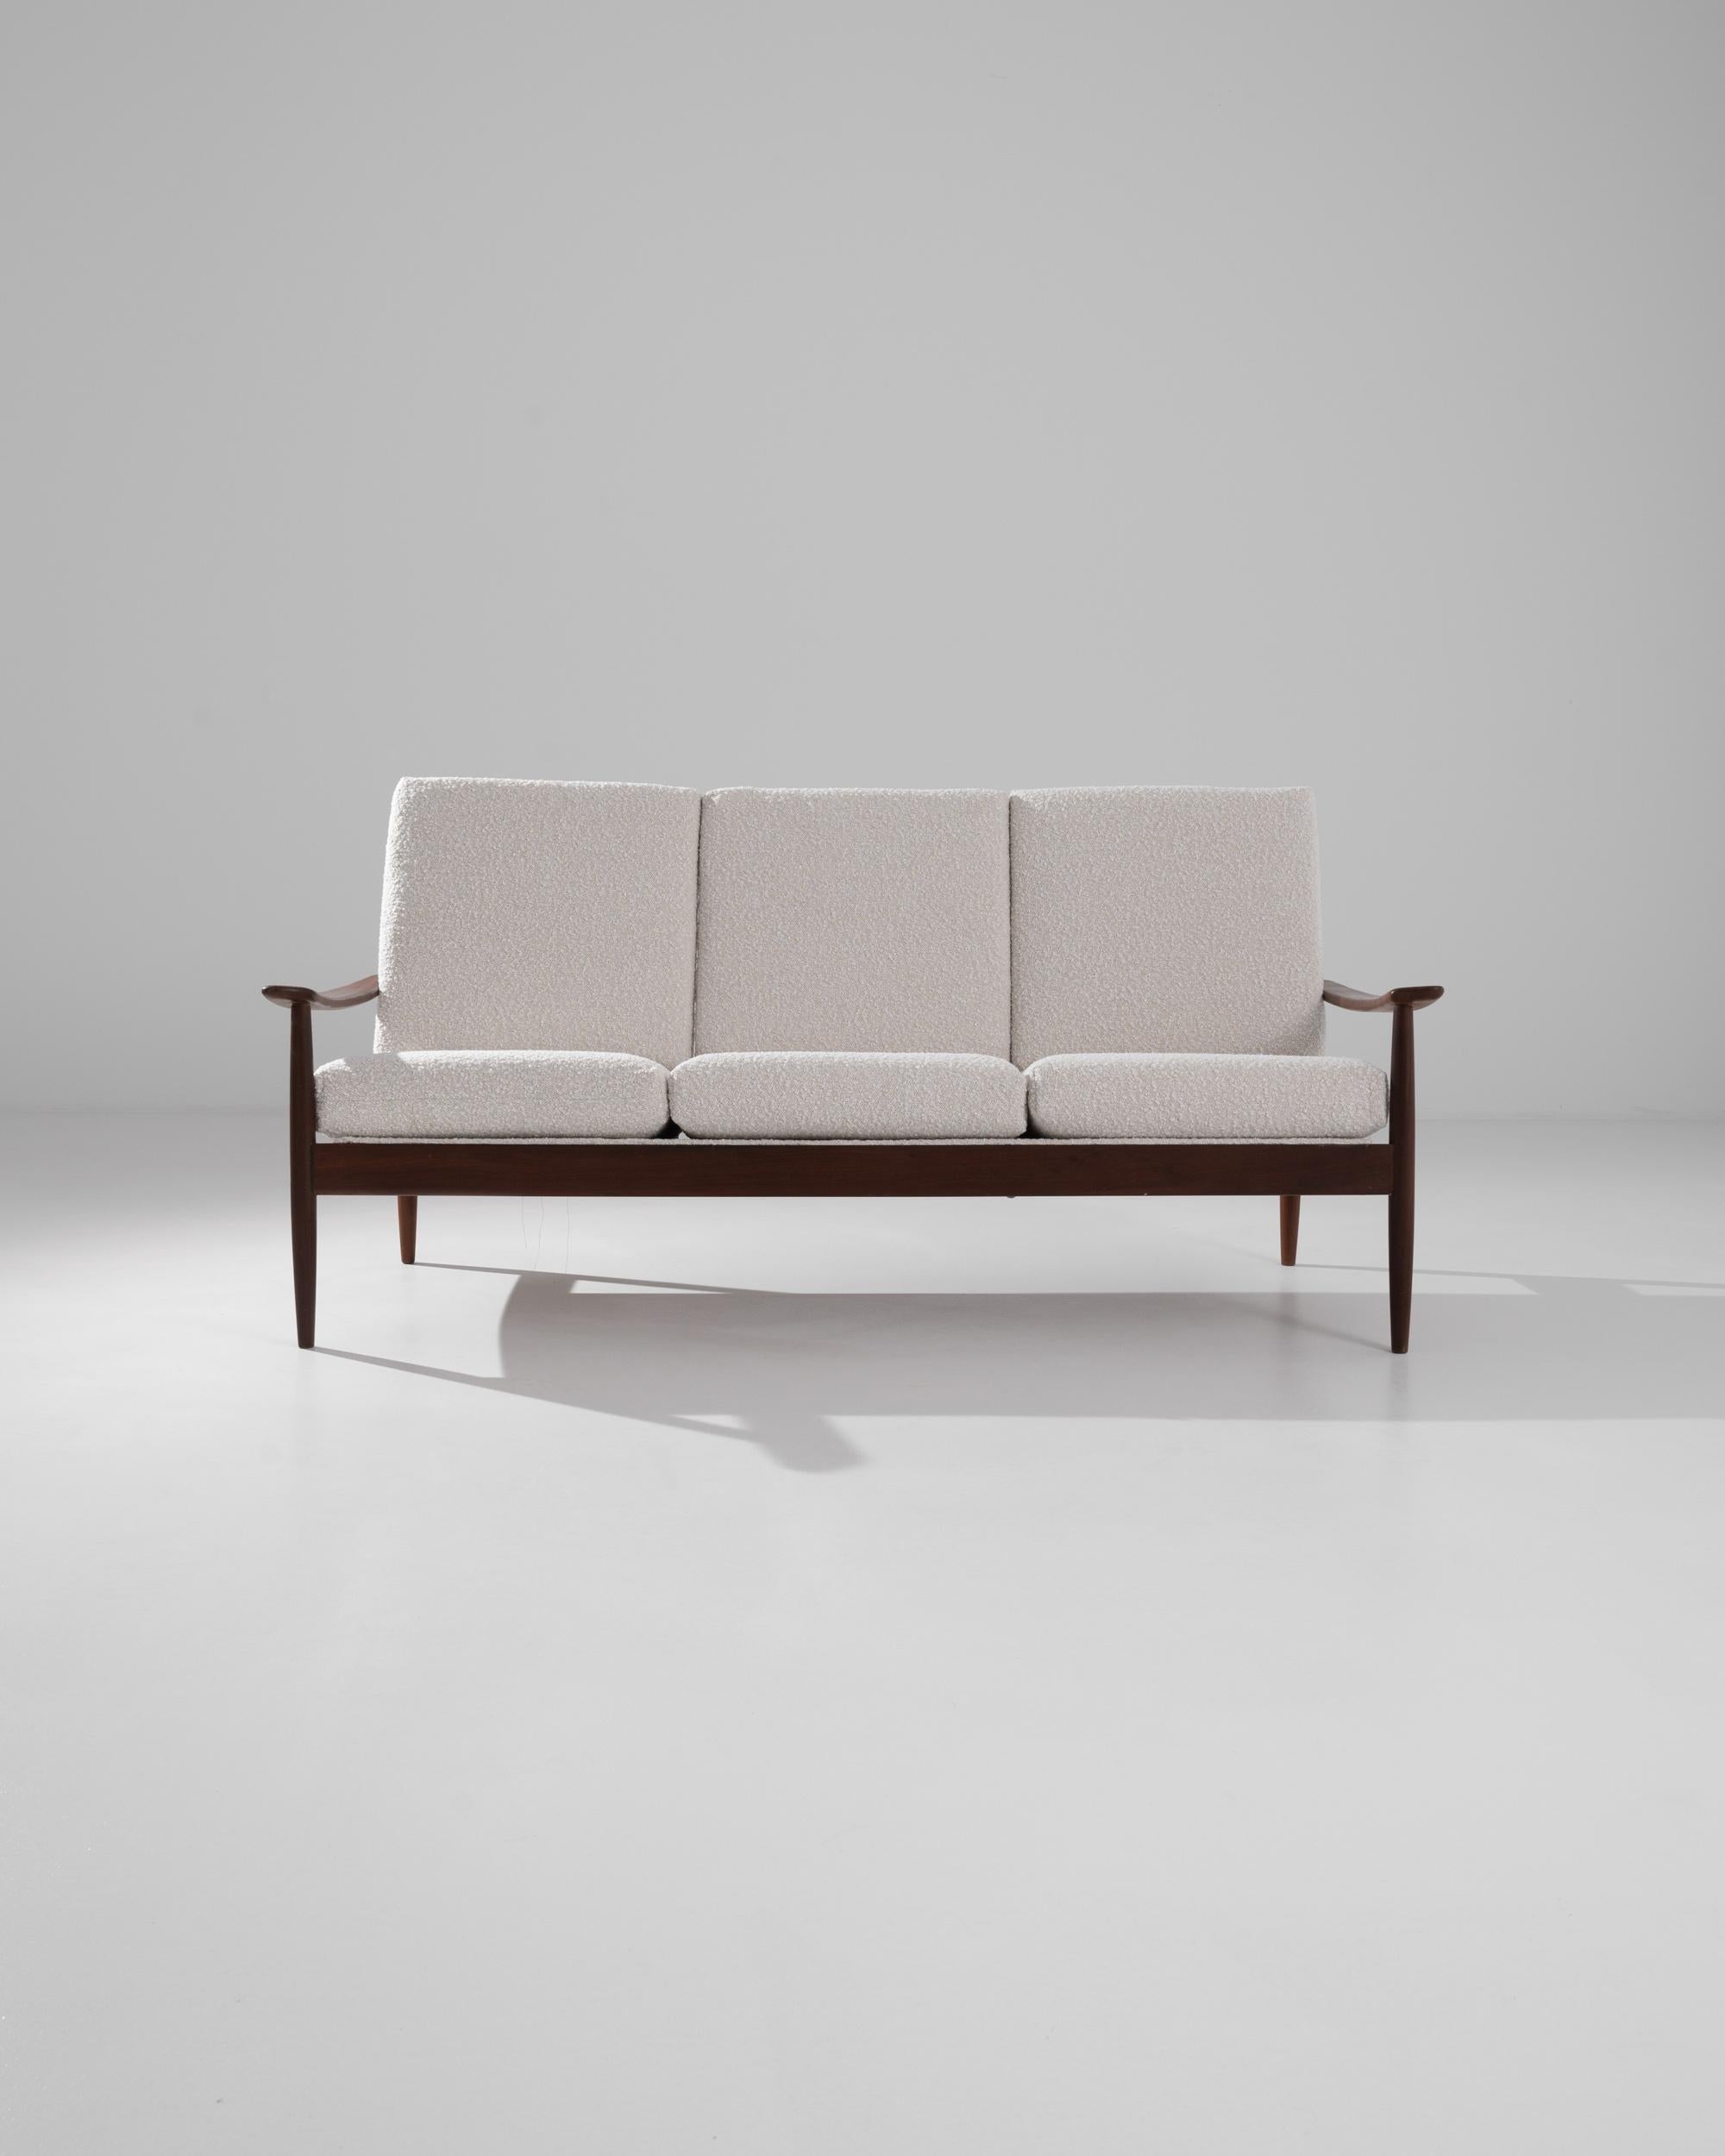 Light and elegant, this 1960s wooden sofa embodies the effortless simplicity of Danish Modern furniture. The silhouette is clean but graceful: slender spindle legs create a poised stance, while the fluid curve of the armrest gives a sense of motion